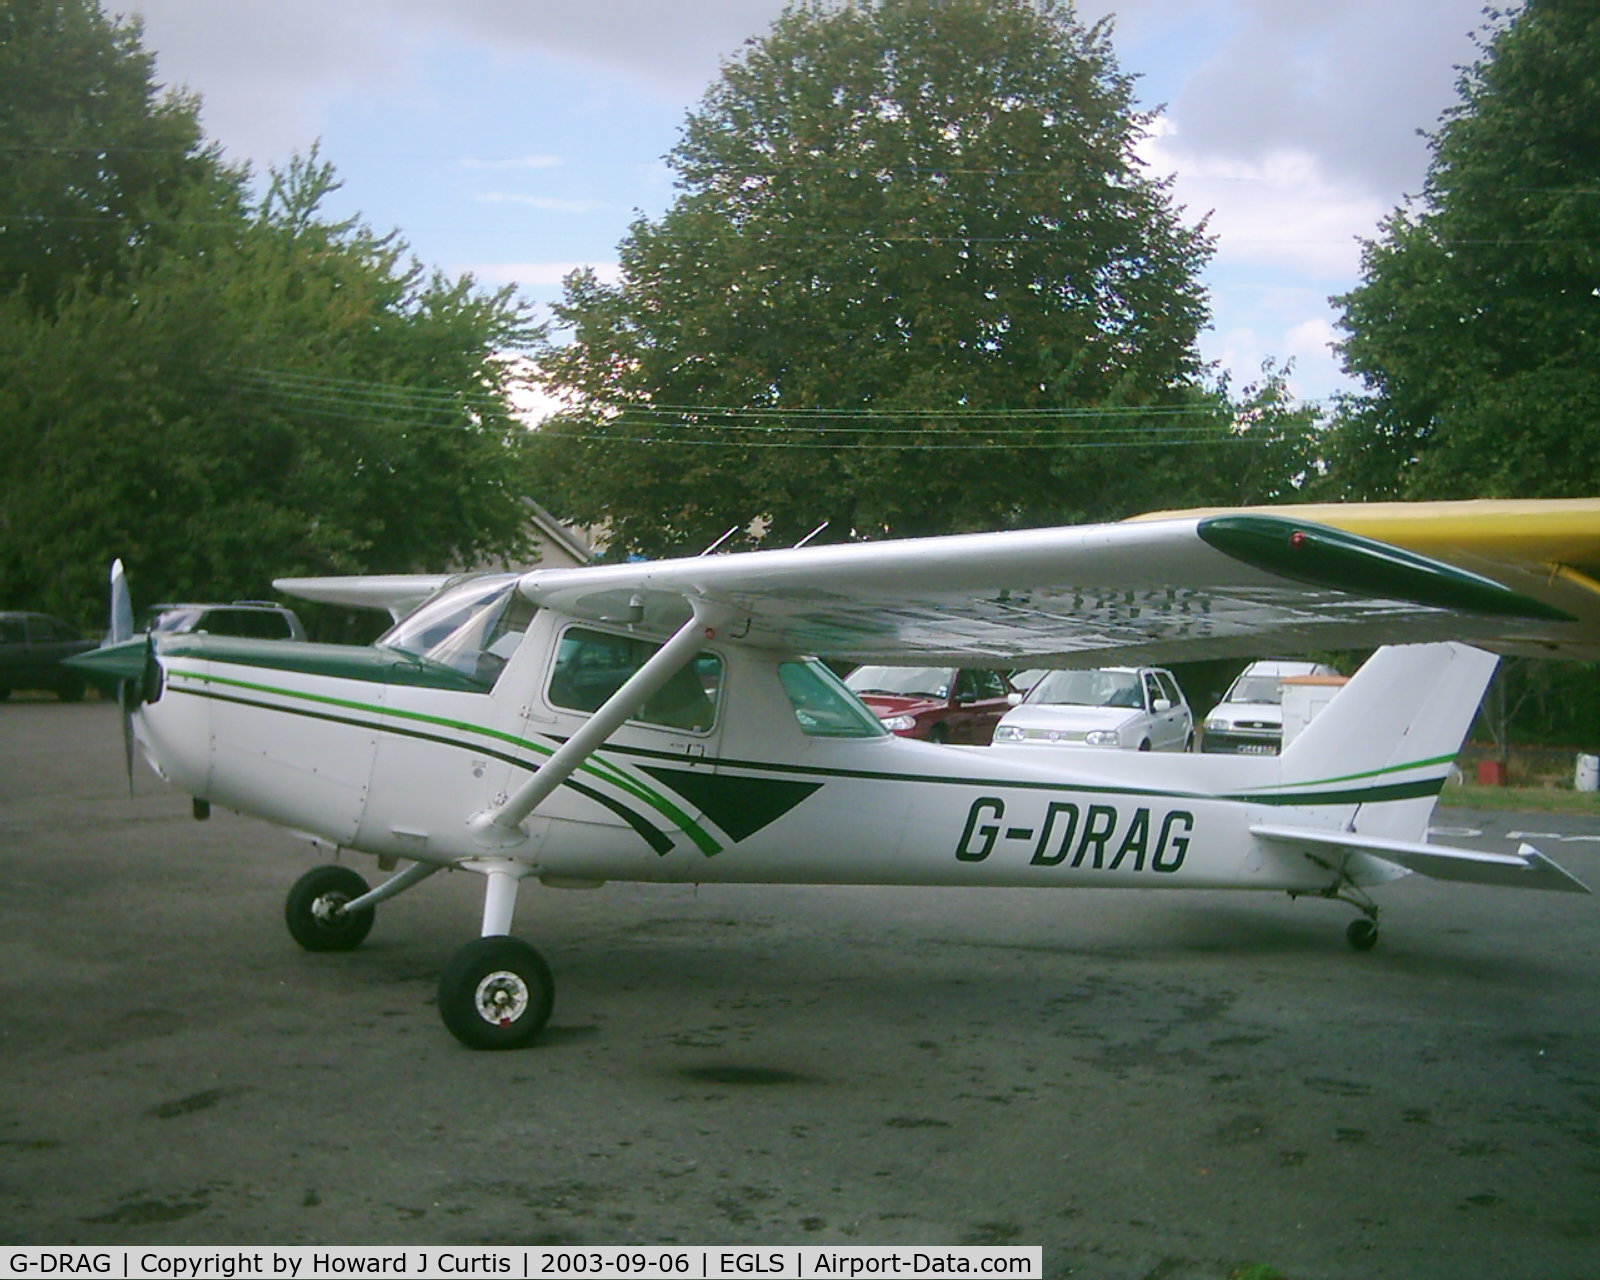 G-DRAG, 1980 Cessna 152 C/N 152-83188, Privately owned.